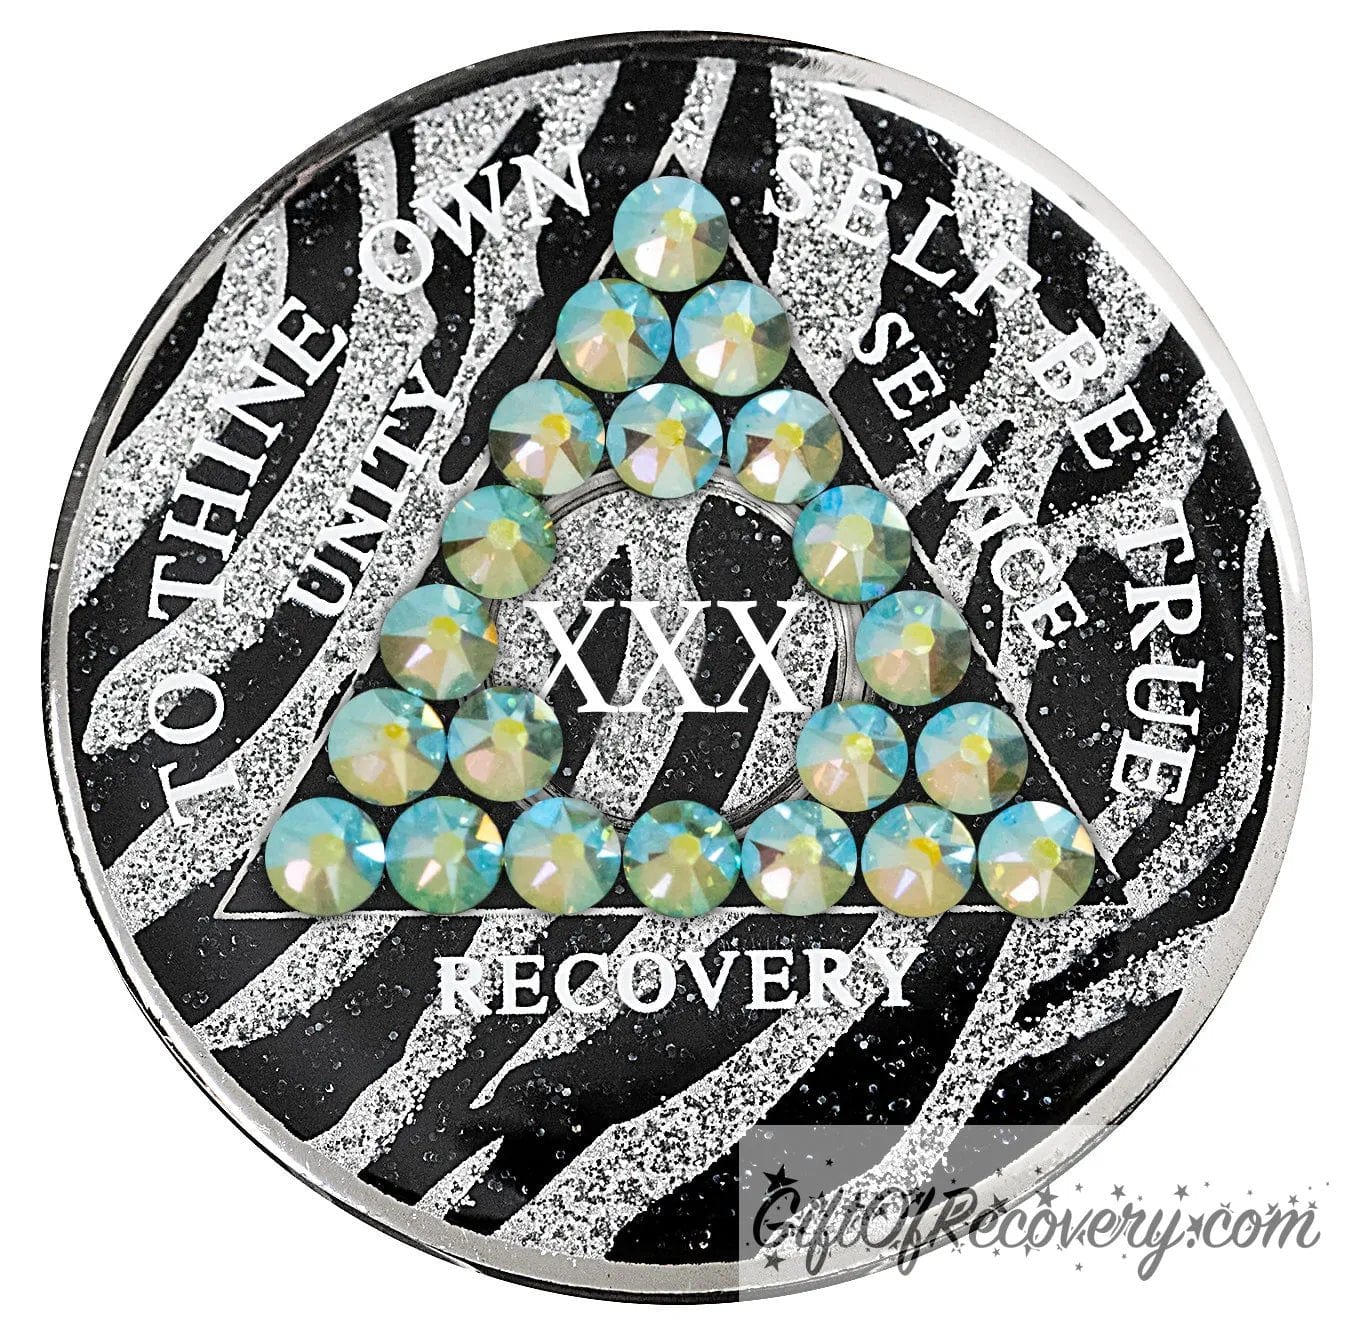 30 year Zebra glitter style AA medallion with 21 genuine peridot crystals, AA moto, unity, service, recovery, and roman numeral are in white and blend into the pattern, so you can let your recovery shine, not your time, the outer rim is silver plated, sealed in a high-quality, chip and scratch-resistant resin dome giving it a beautiful glossy look that will last.